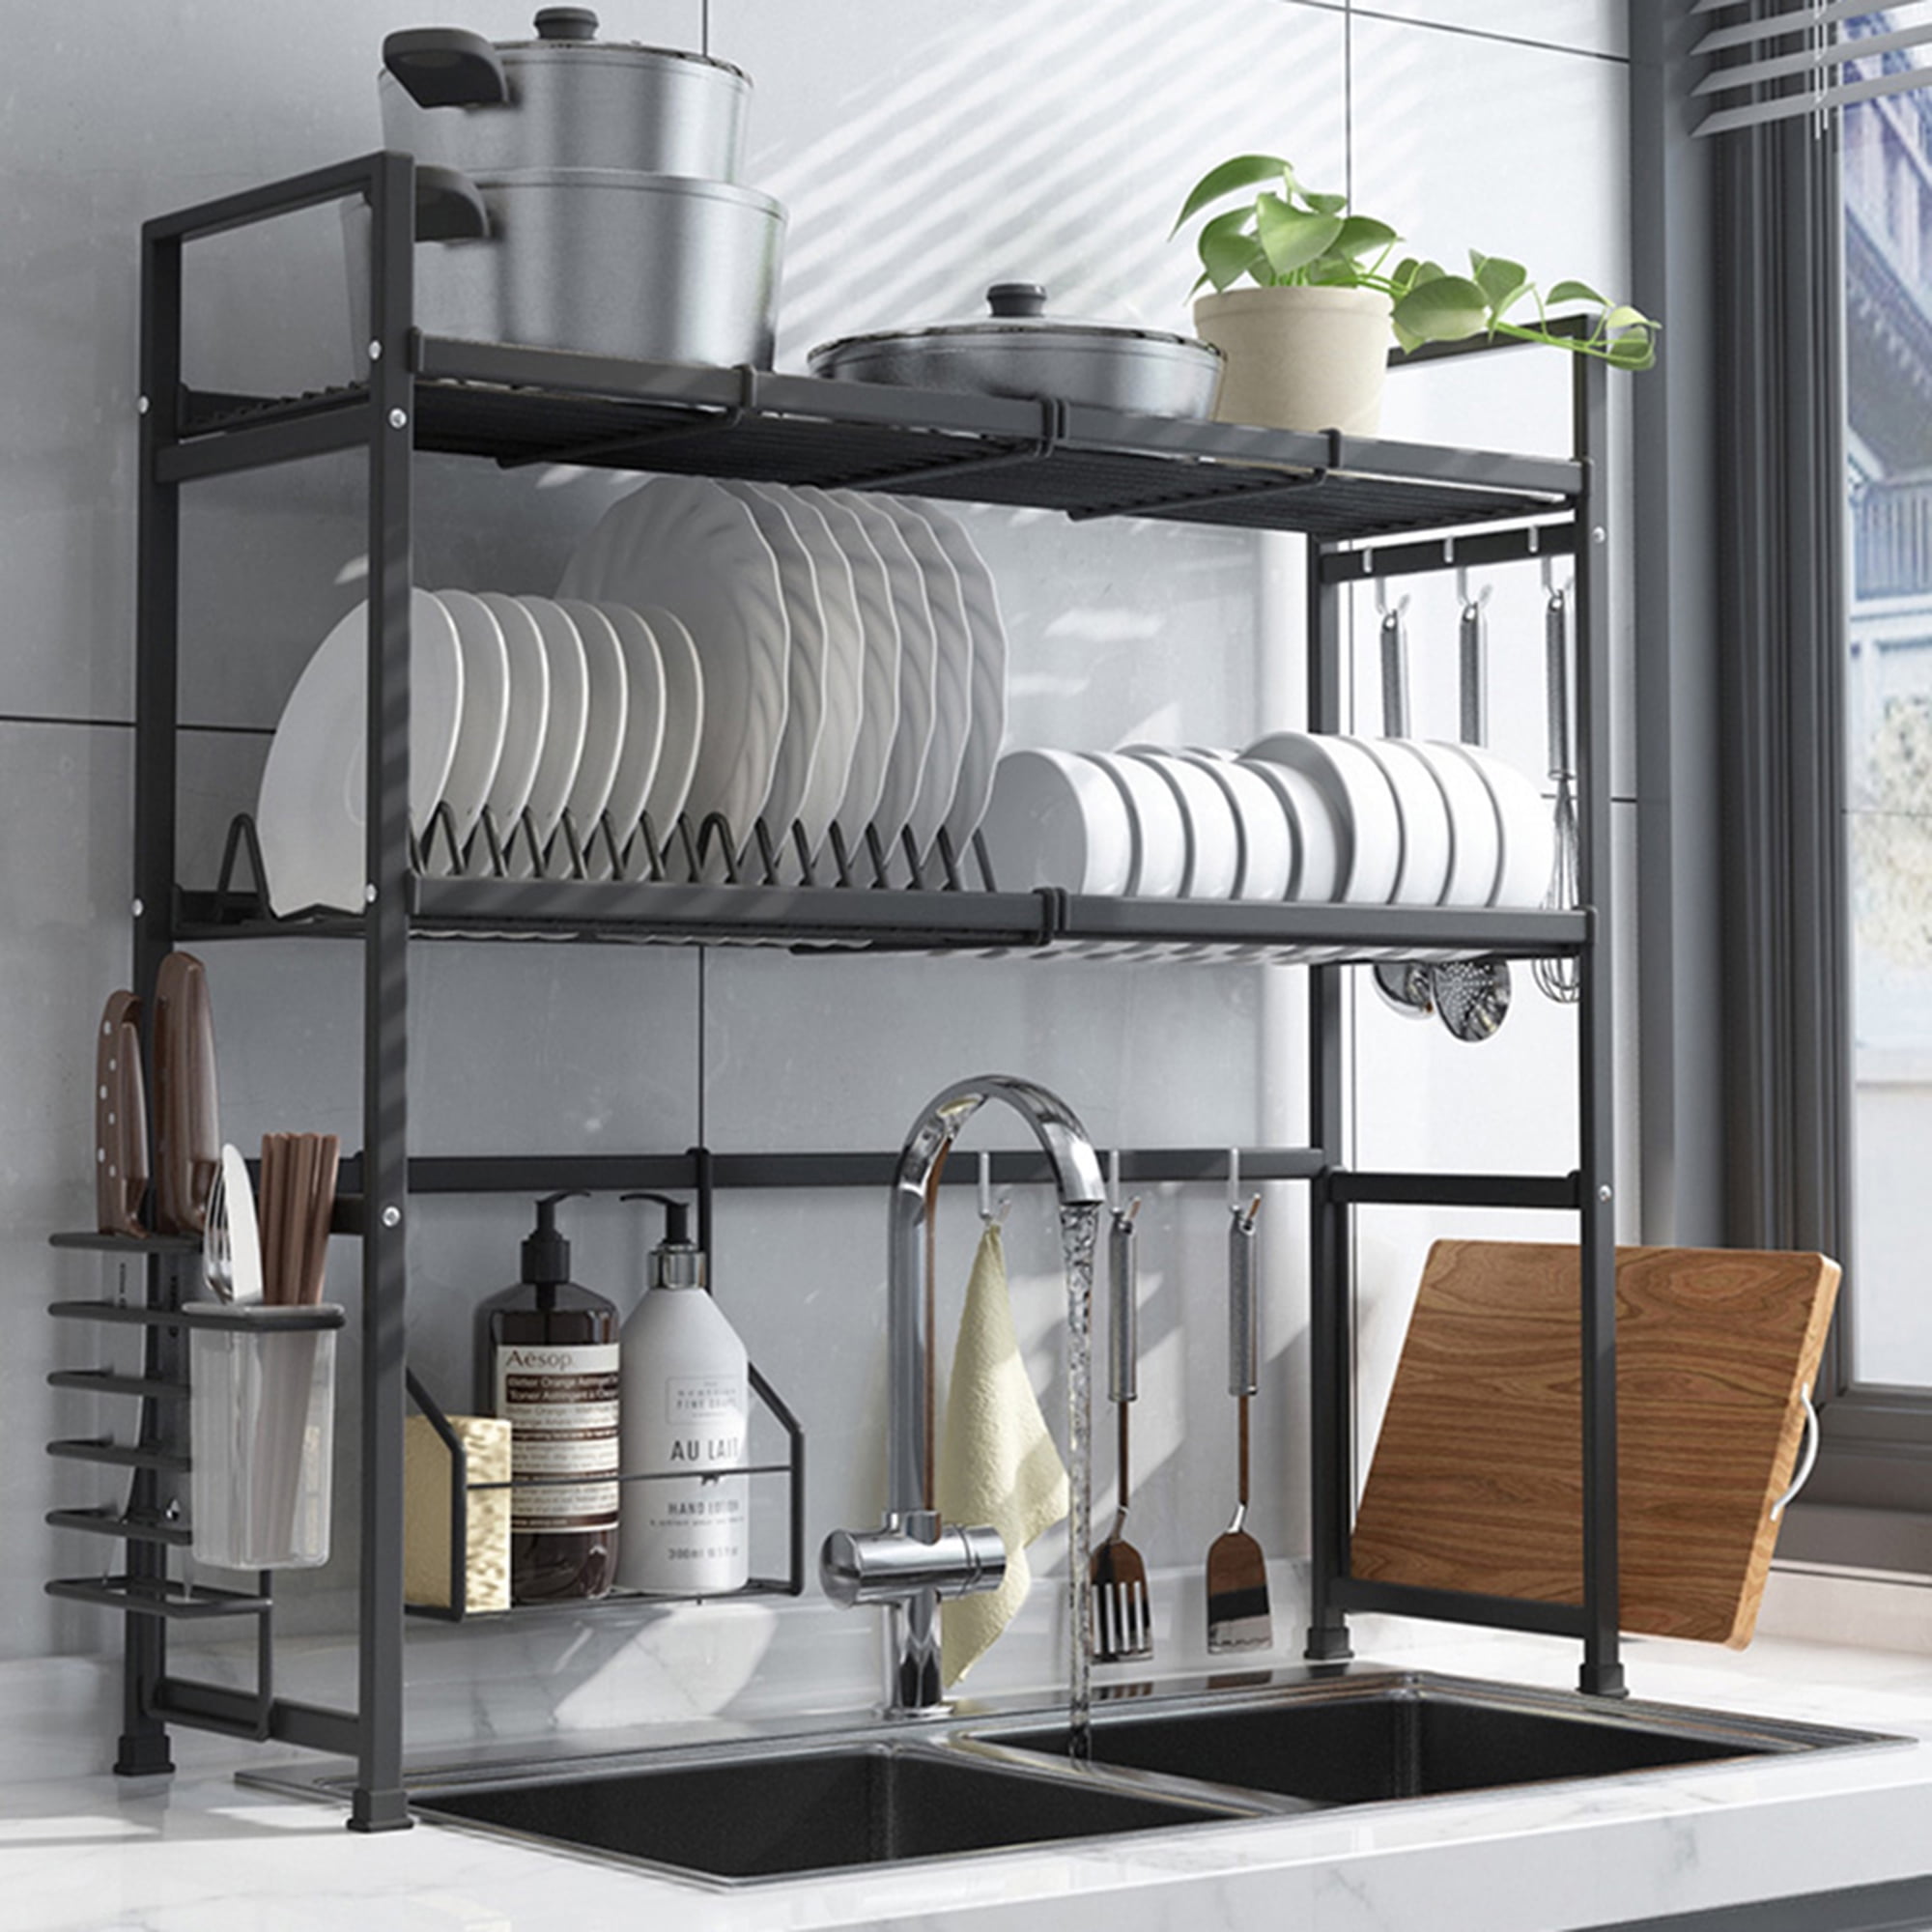 Details about   2-Tier Over Sink Dish Drying Rack Cutlery Drainer Kitchen Shelf Stainless Steel 